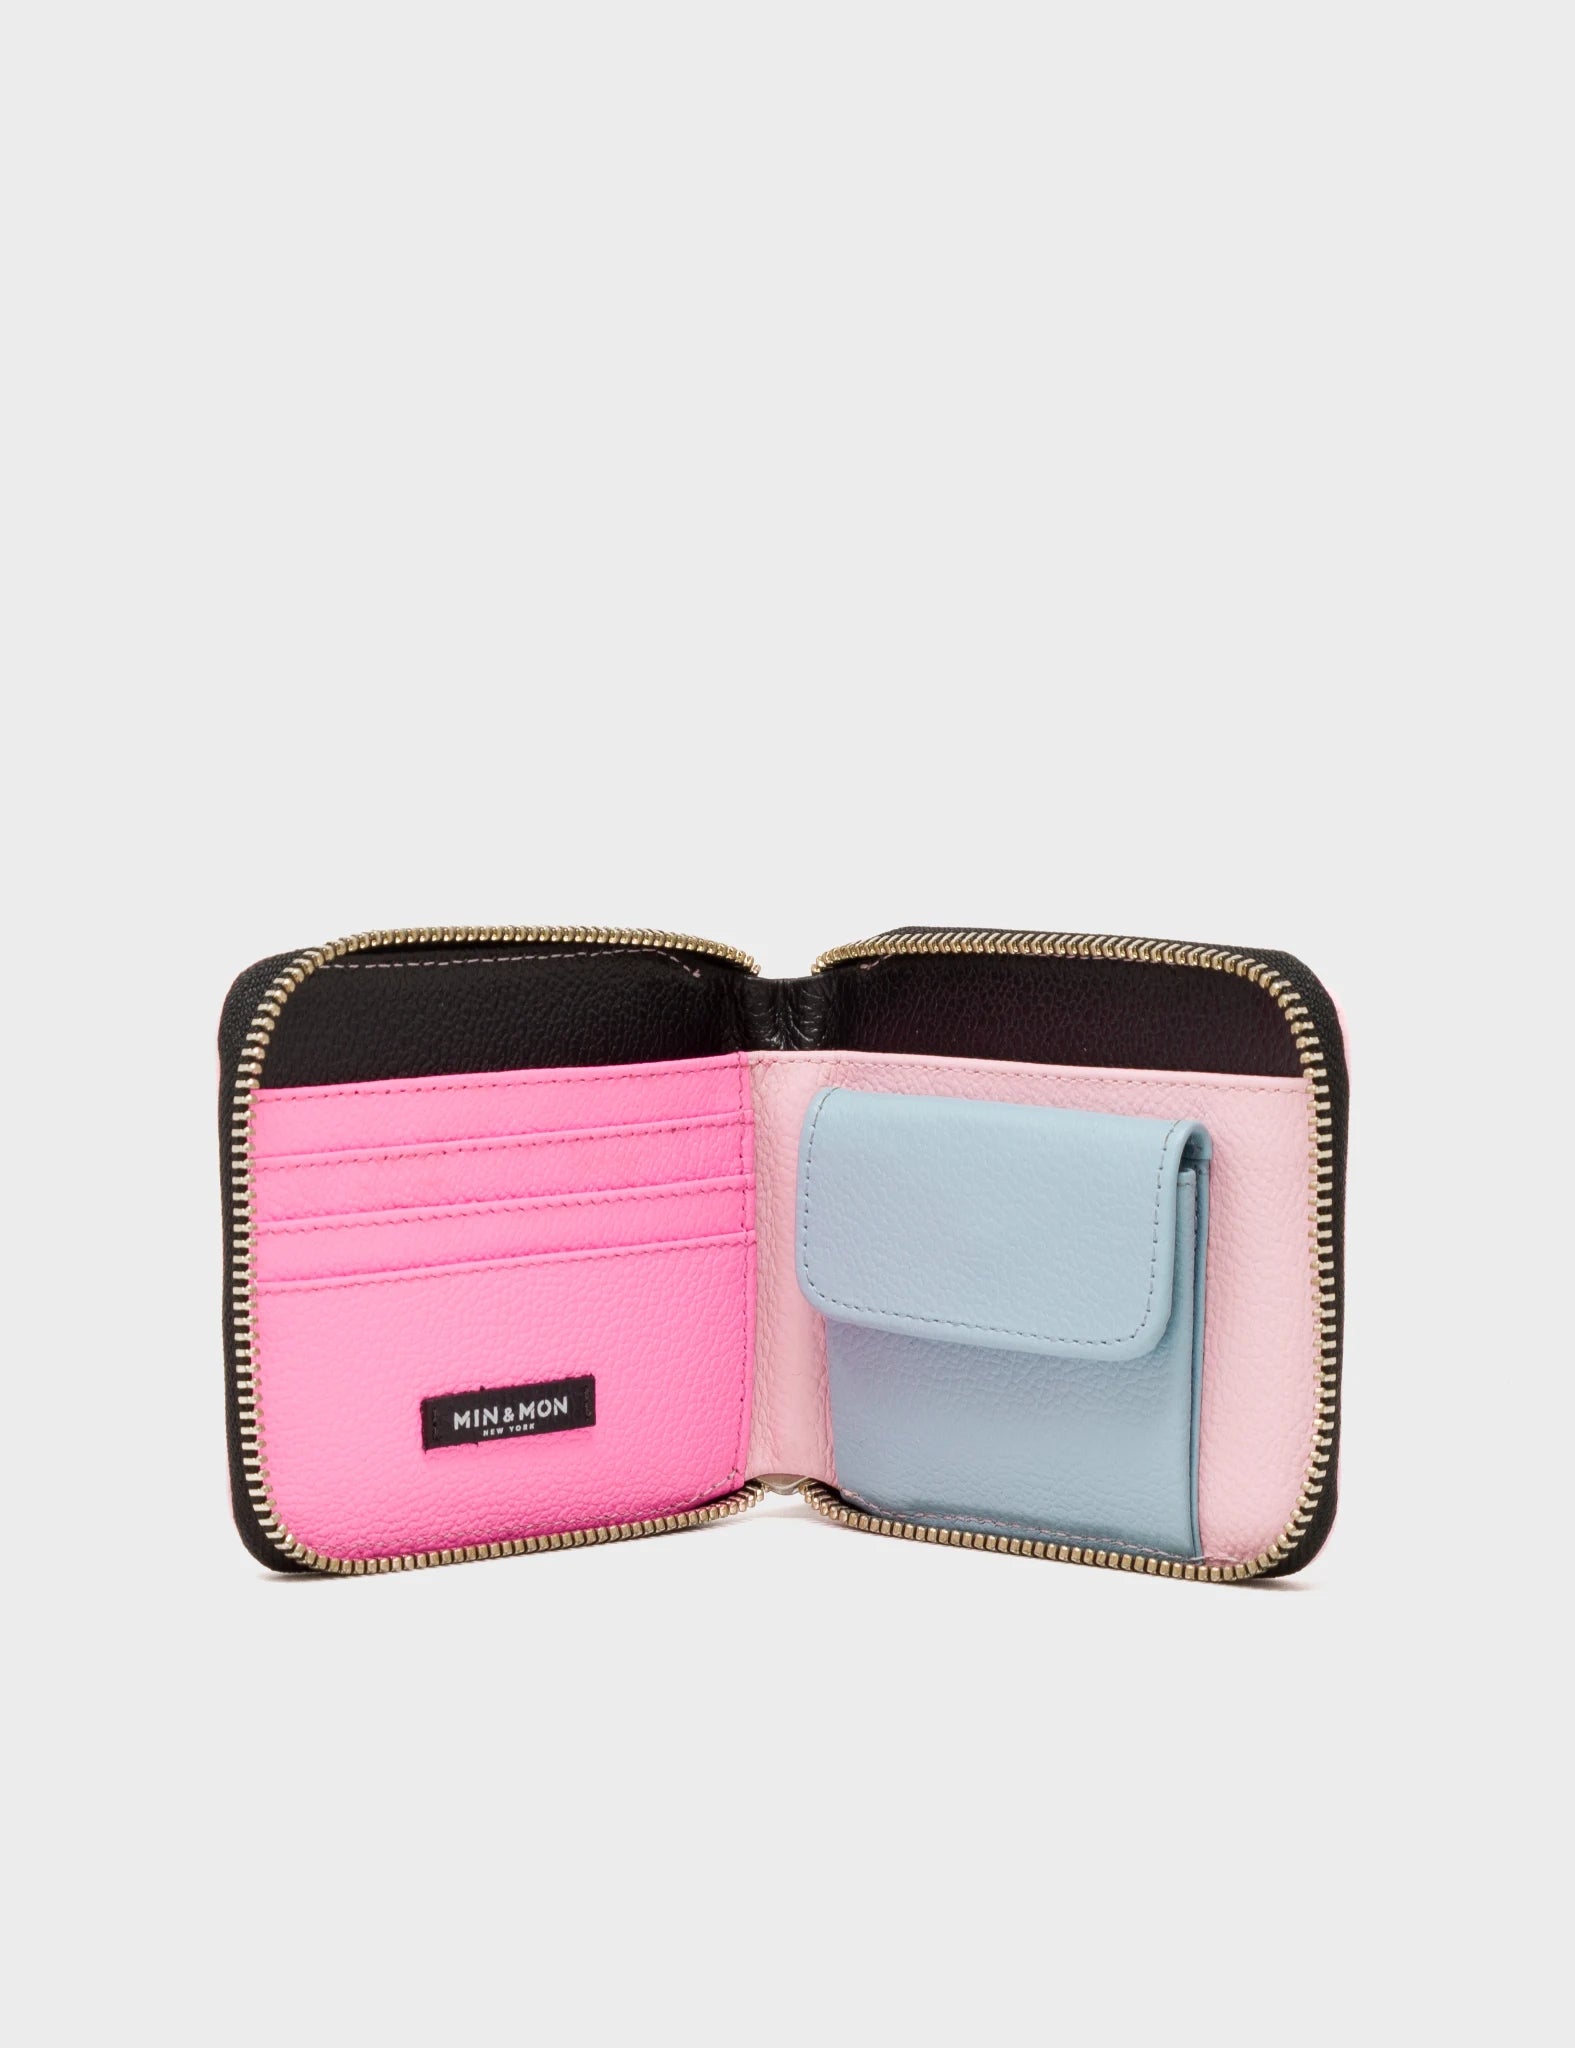 Fedor Parfait Pink And Blue Leather Wallet - Tiger Embroidery - Inside 